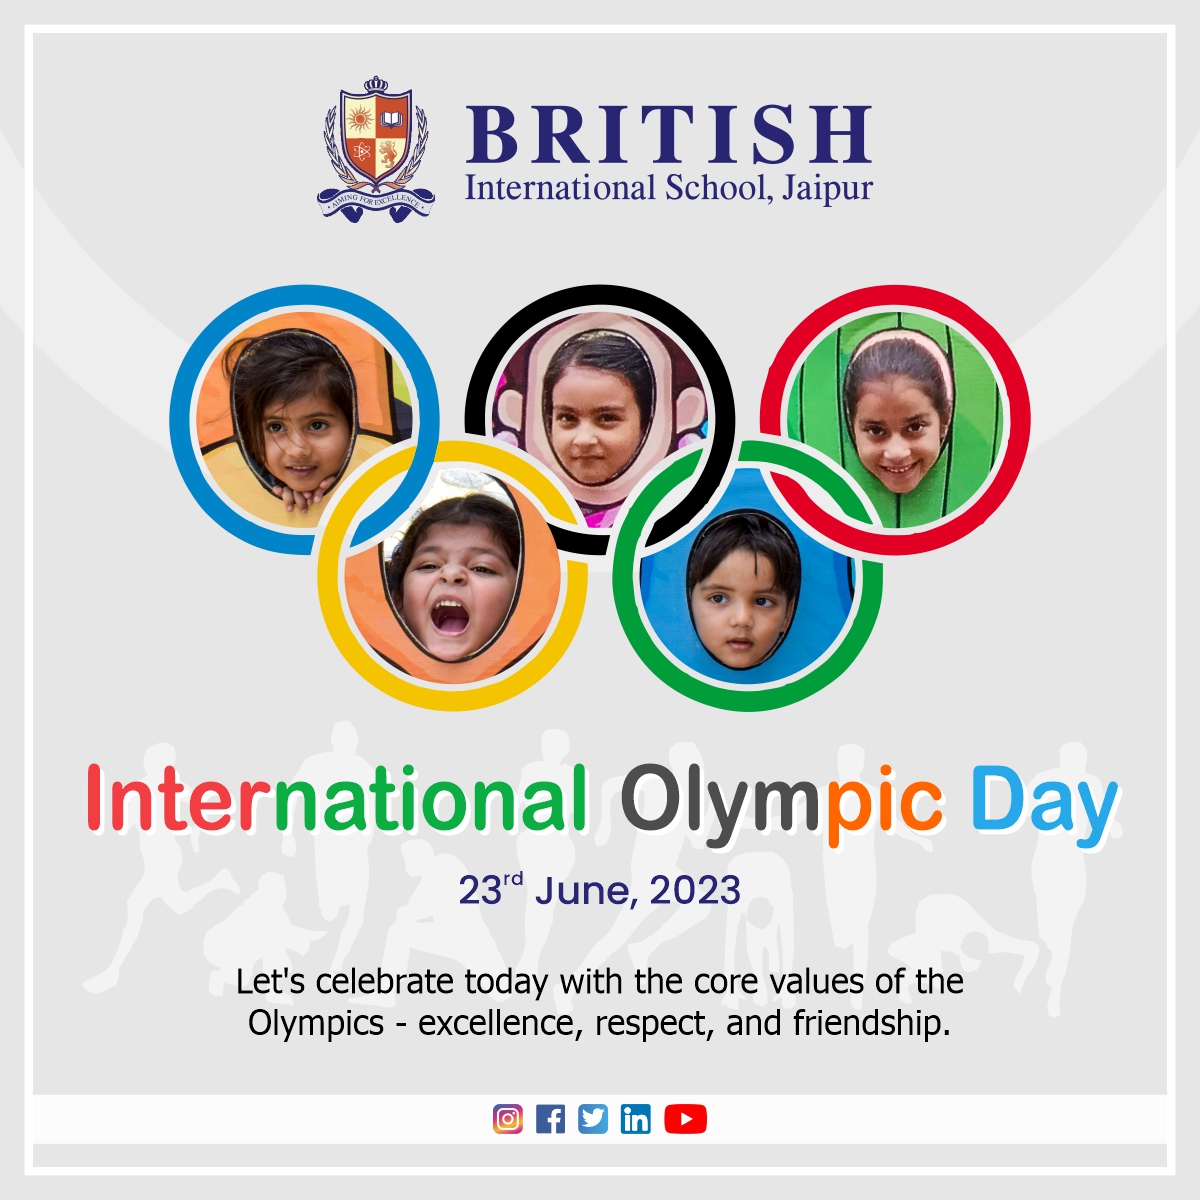 International Olympics Day is observed on June 23 every year to celebrate sports and health. 

#britishinternationalschool #internationalolympicday #Olympics #sports #sportsschool #education #cbseschool #bestschoolinrajasthan #bestschool #bisjapur #bisjapurofficial #explore